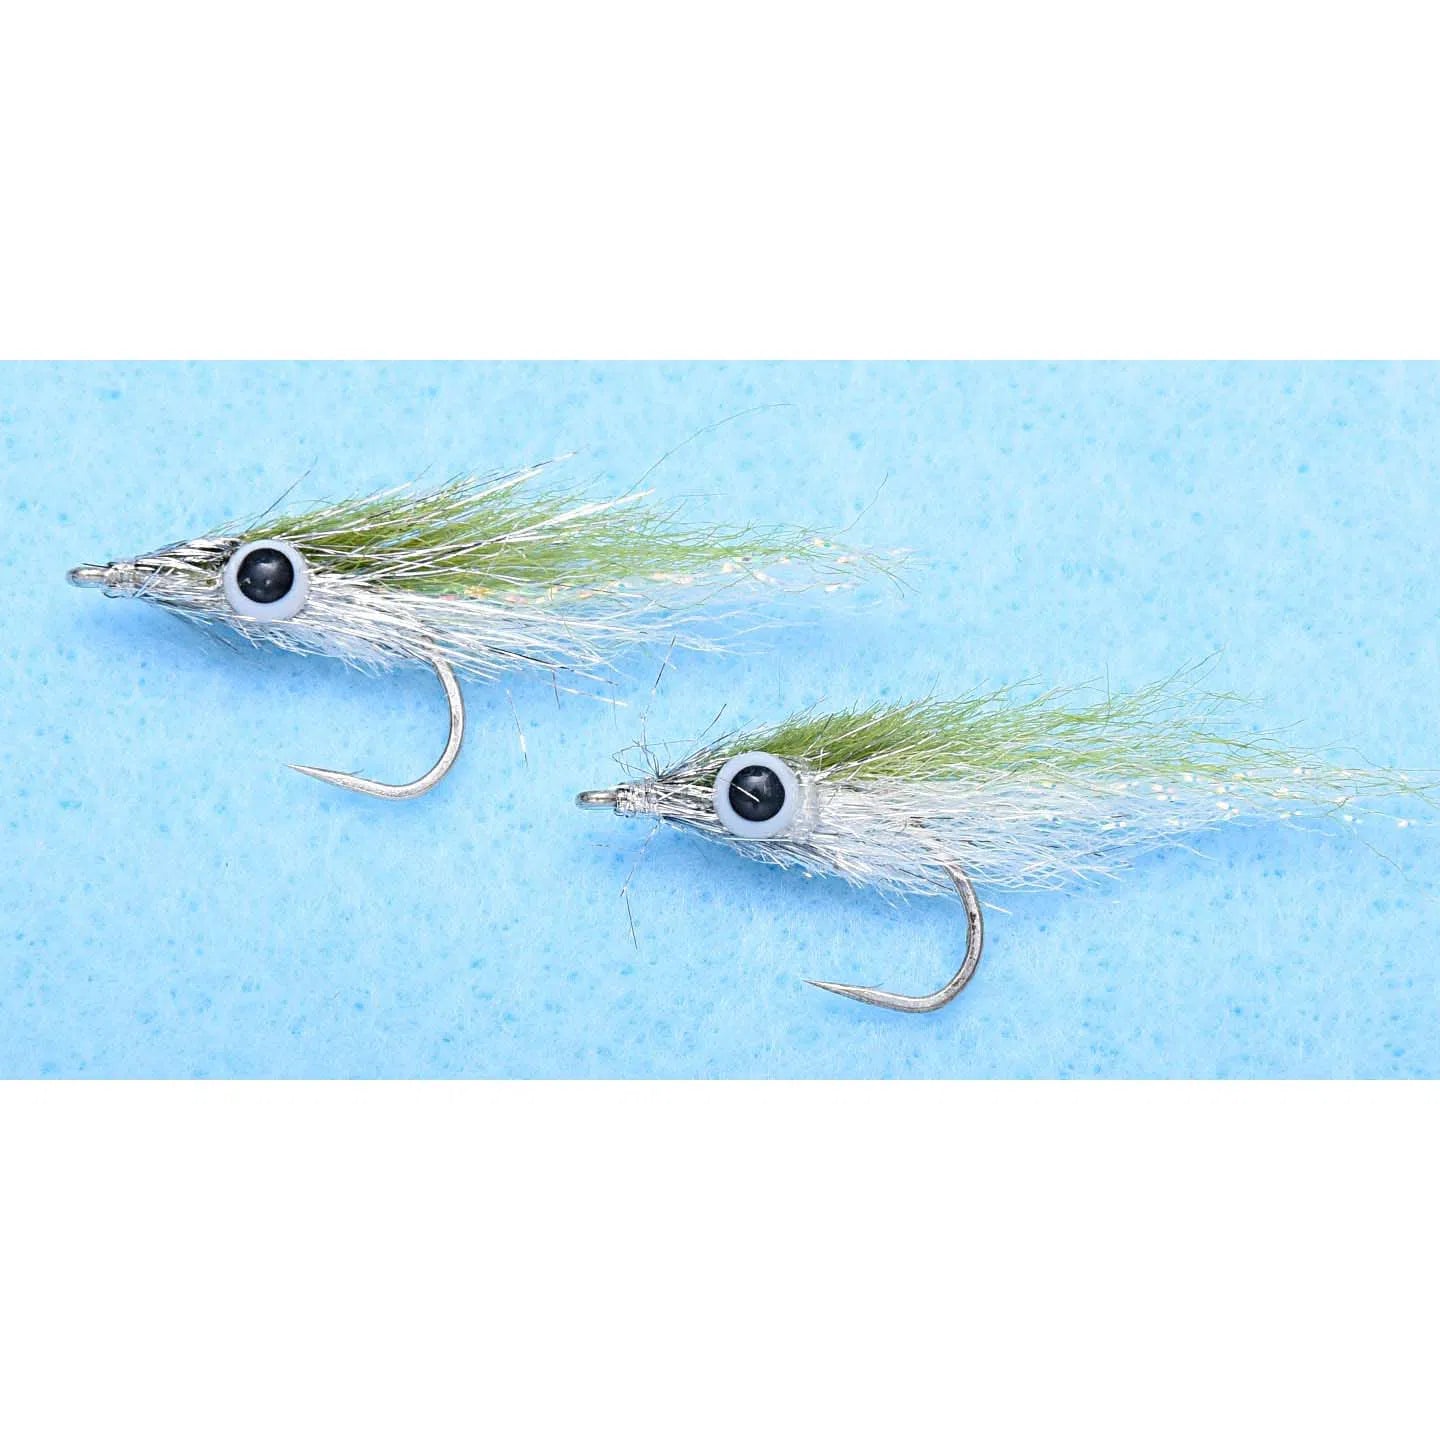 Enrico Puglisi Micro Minnow Fly-Lure - Fly-Enrico Puglisi-Light Olive-Size #2-Fishing Station